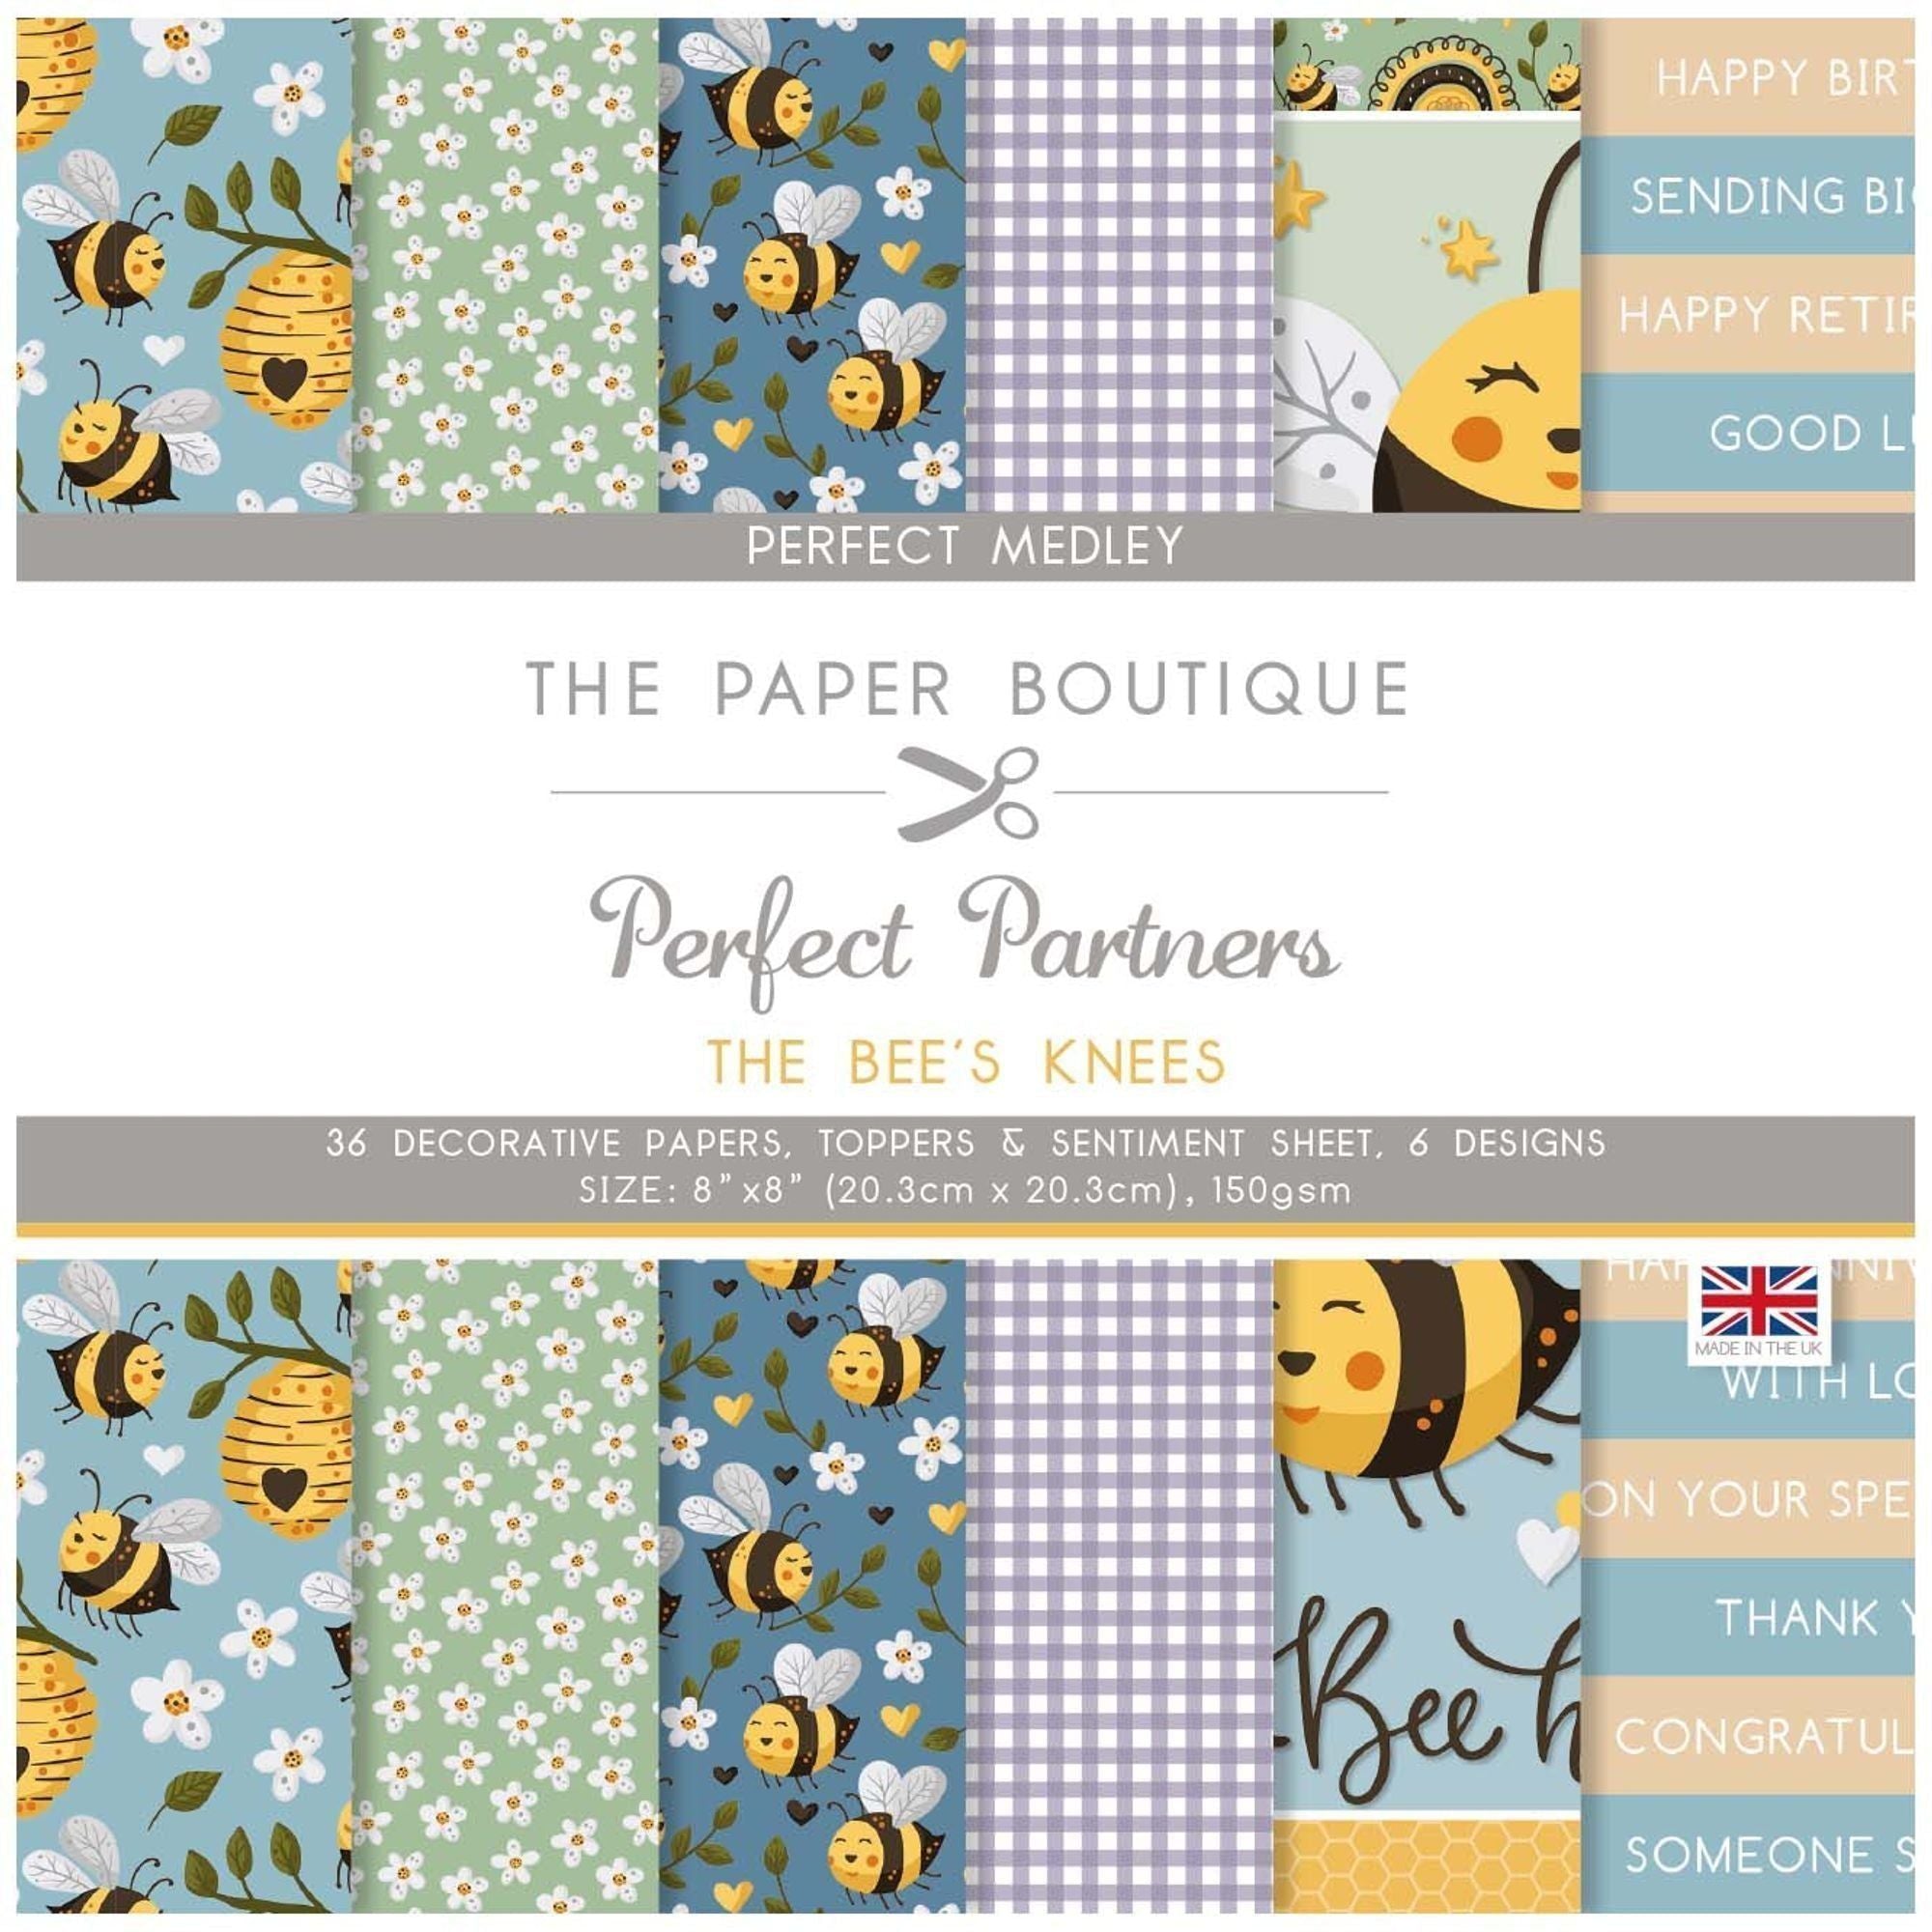 The Paper Boutique Perfect Partners - The Bee's Knees 8x8 Medley